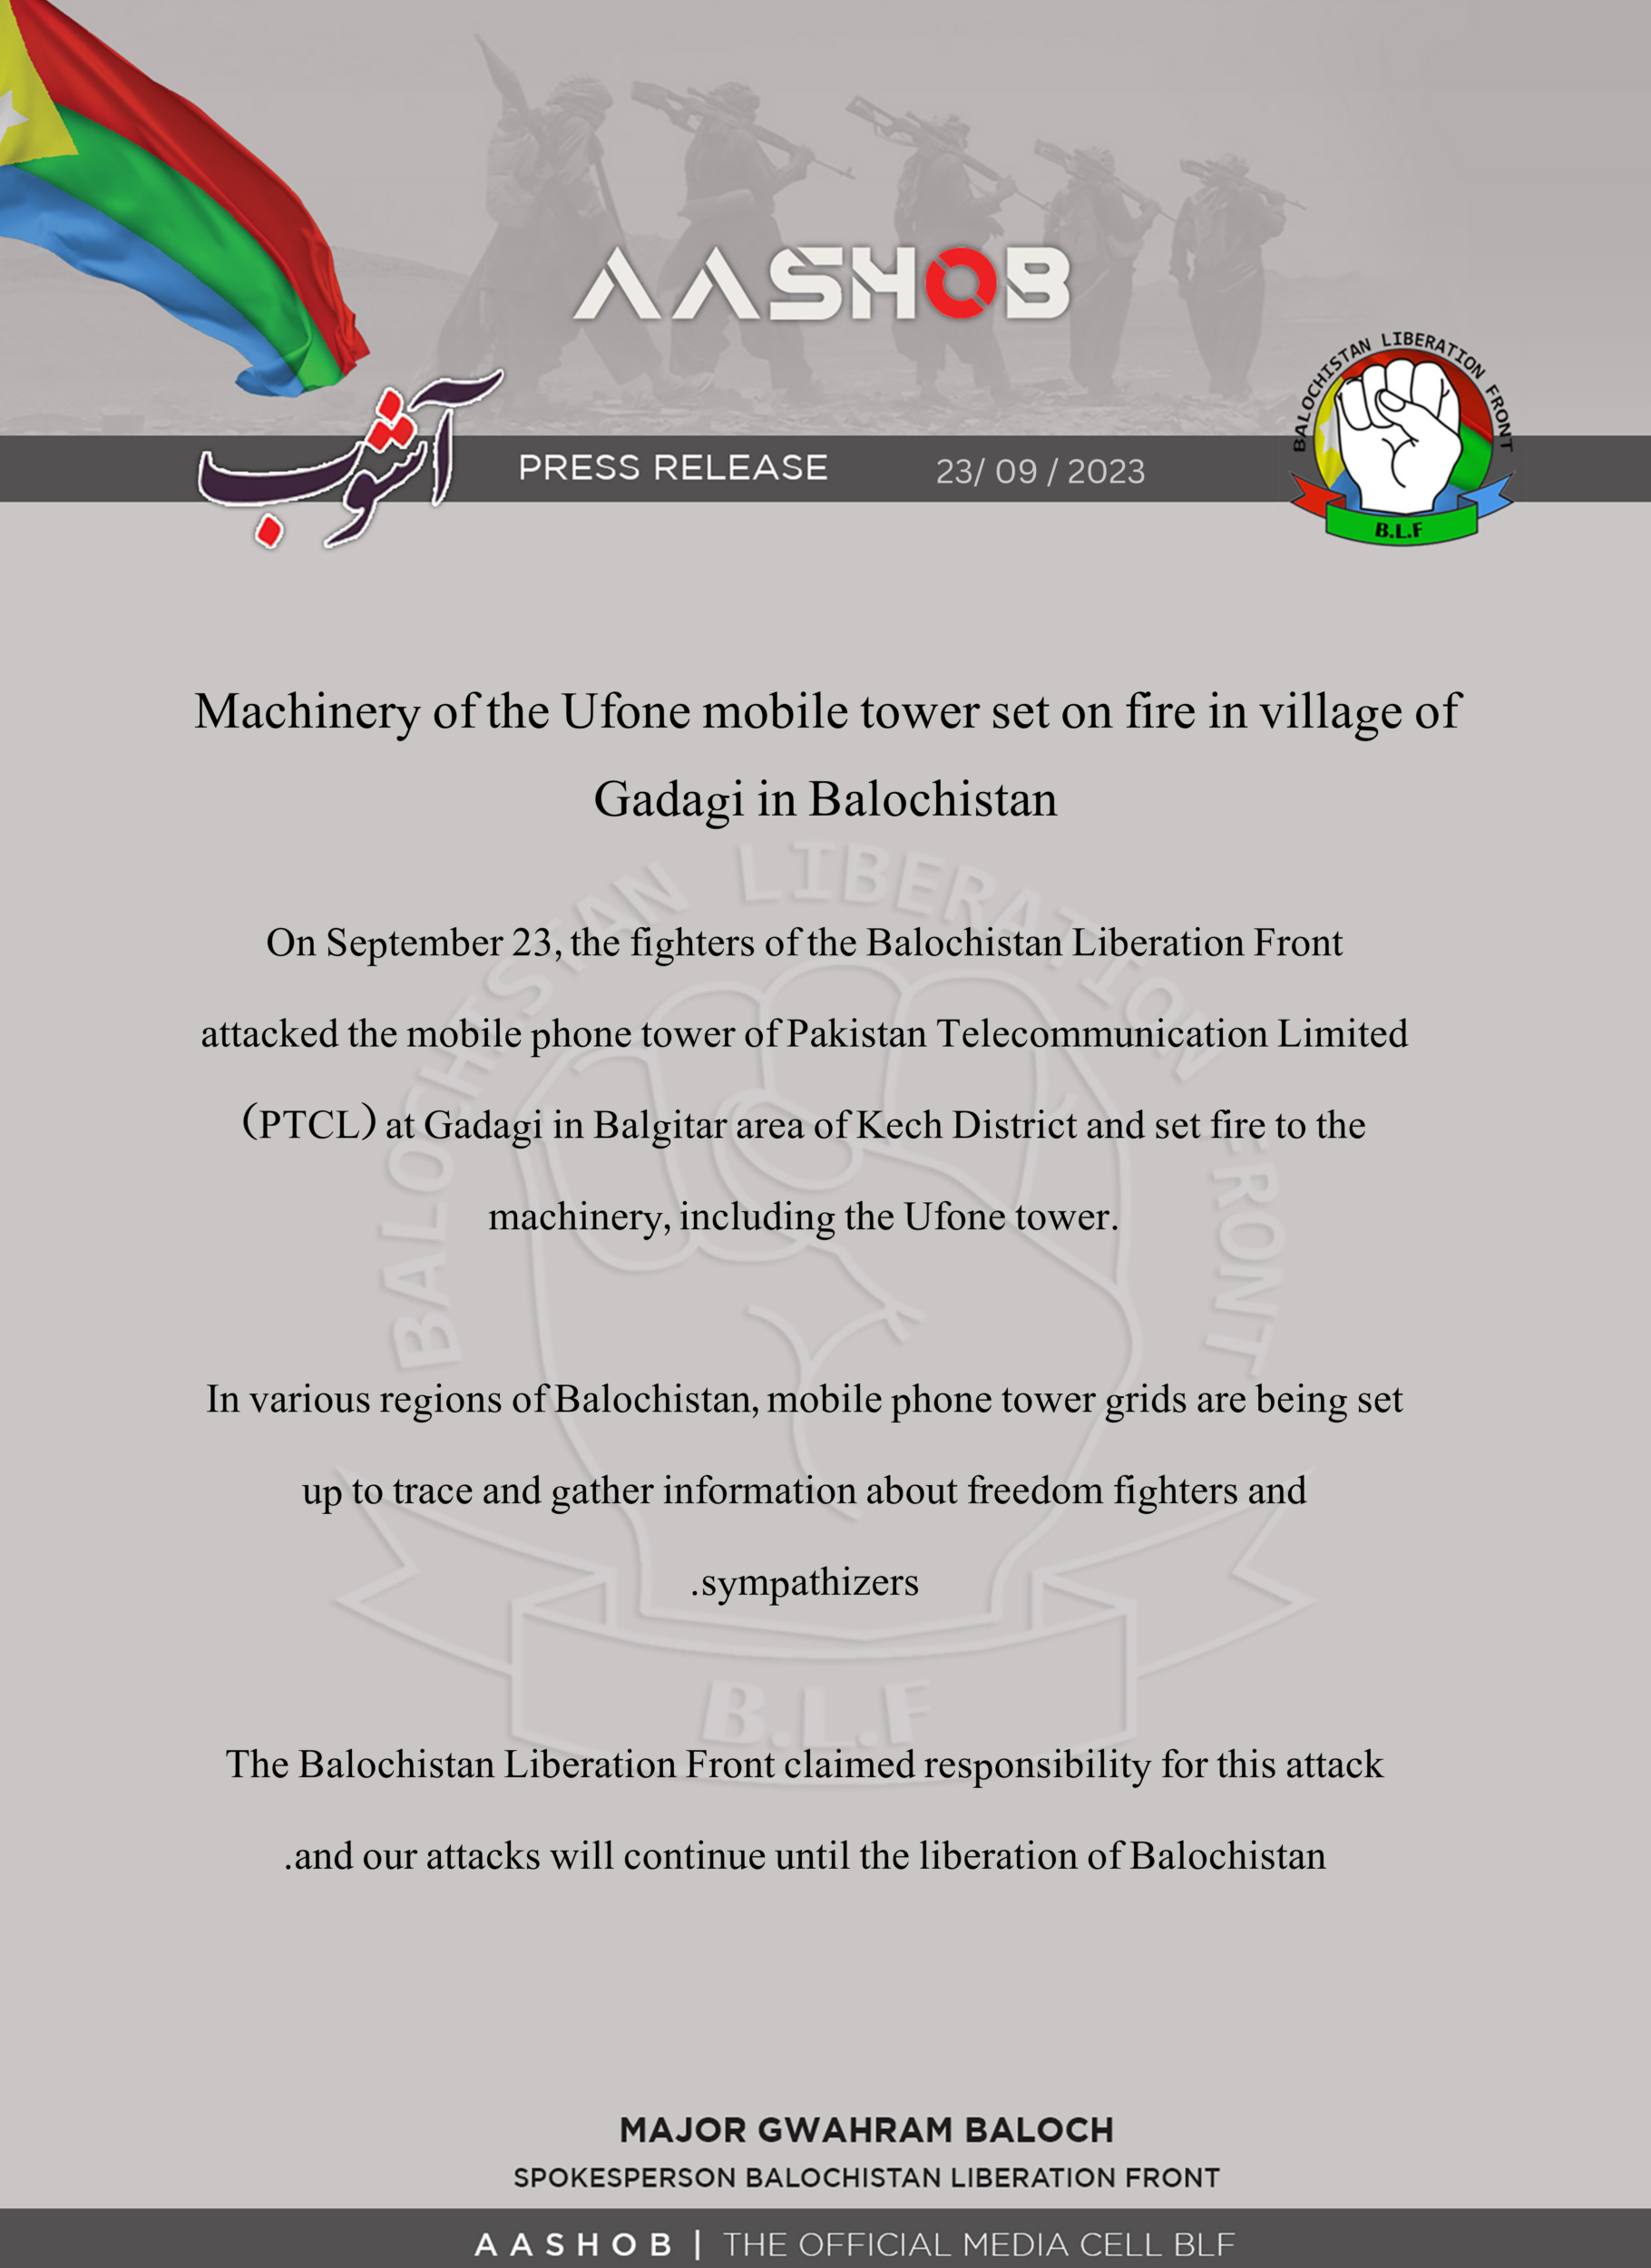 (Claim) Baloch Liberation Front (BLF) Militants Arson of the Ufone Mobile Tower in Gadgi, Balochistan, Pakistan - 23 September 2023